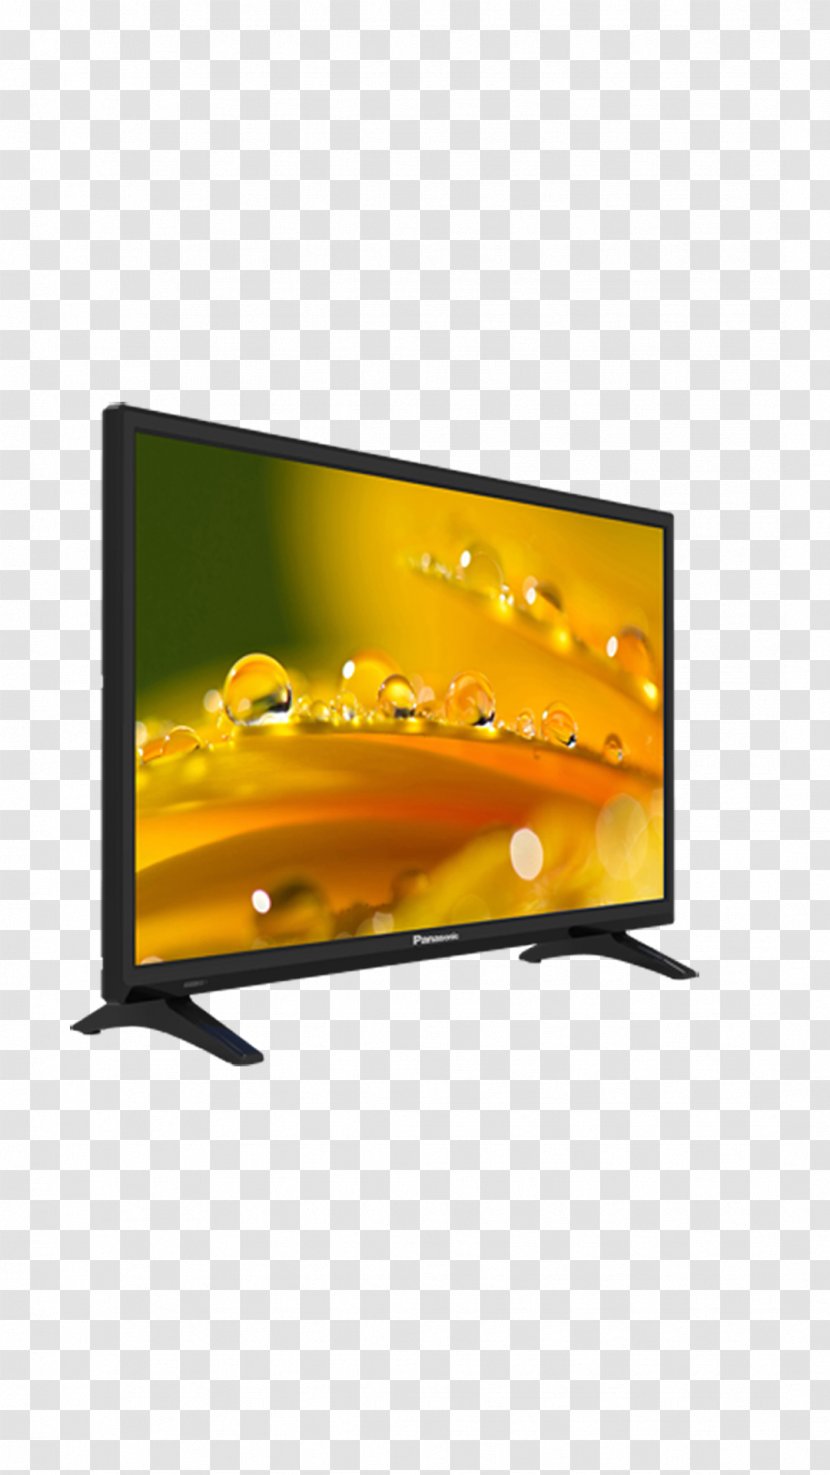 LED-backlit LCD HD Ready High-definition Television Panasonic - Flat Panel Display - Tv Transparent PNG